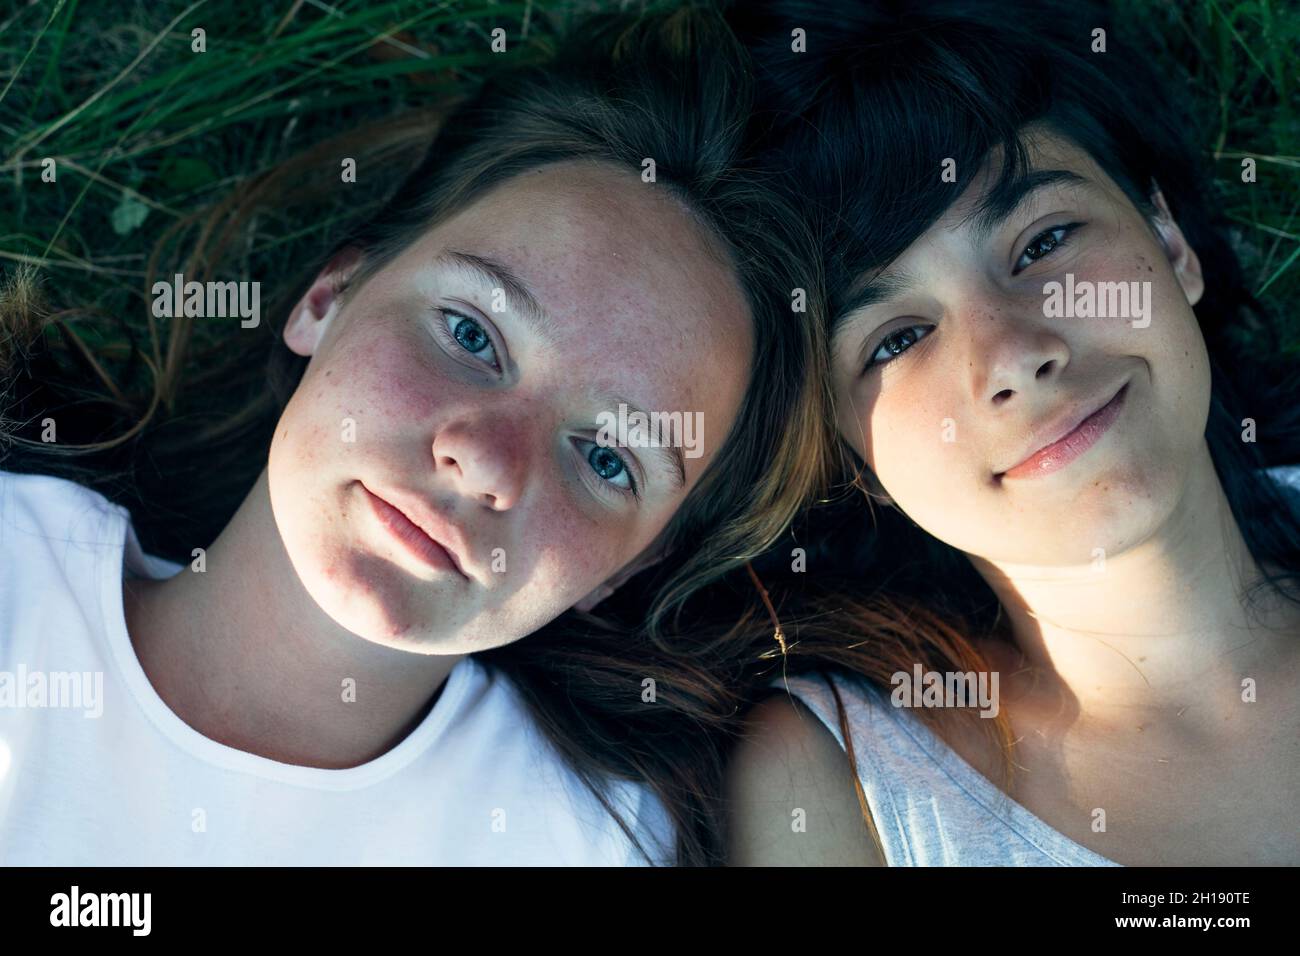 Portrait of two teen girls friends lying on the grass, close-up shot from above. Stock Photo